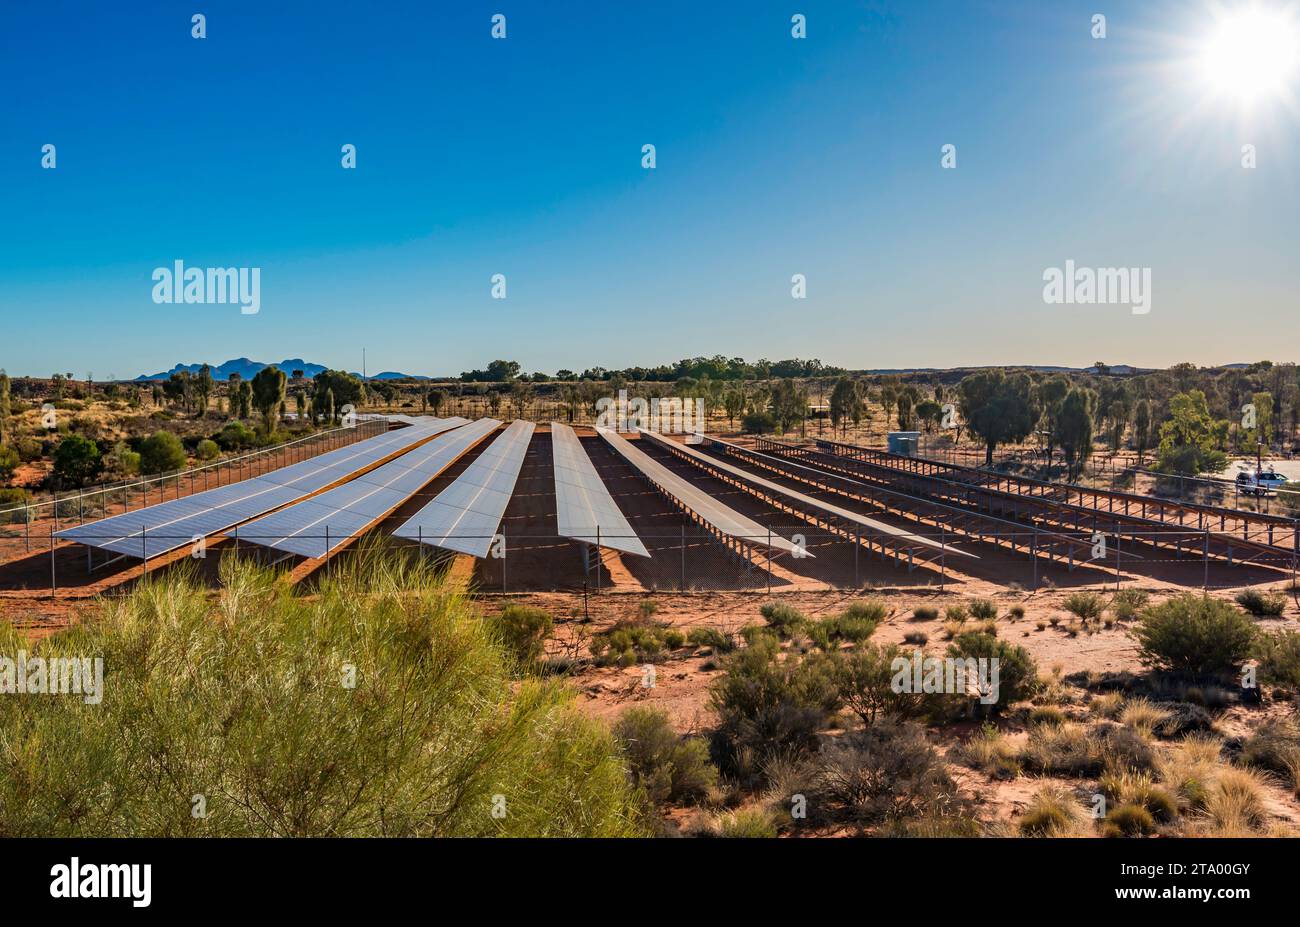 Part of the Tjintu Solar Field at Ayers Rock Resort in Central Australia. The photovoltaic panels (PV) provide up to 30% of the resort's power needs Stock Photo